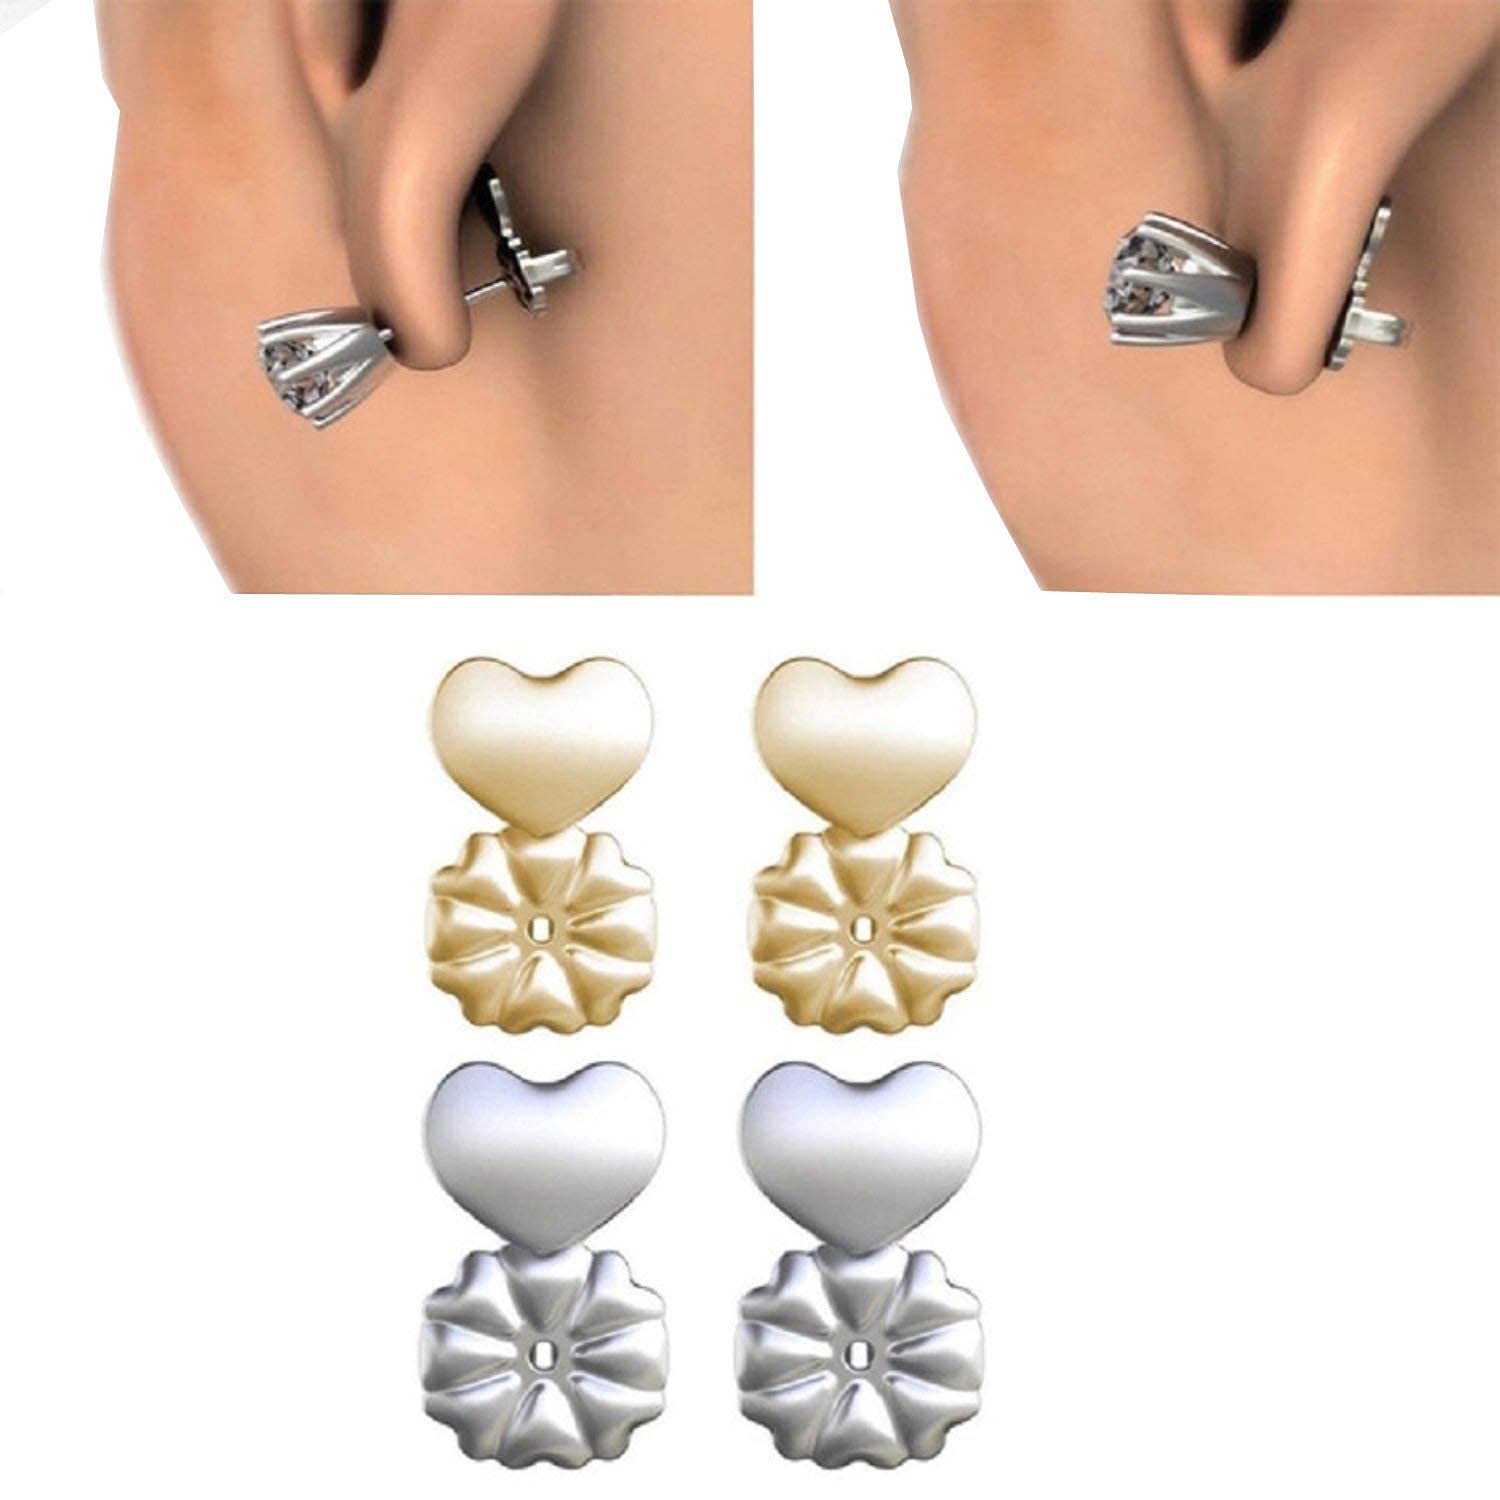 2pairs Safe Earring Backs And Lifters For Sagging Earlobes